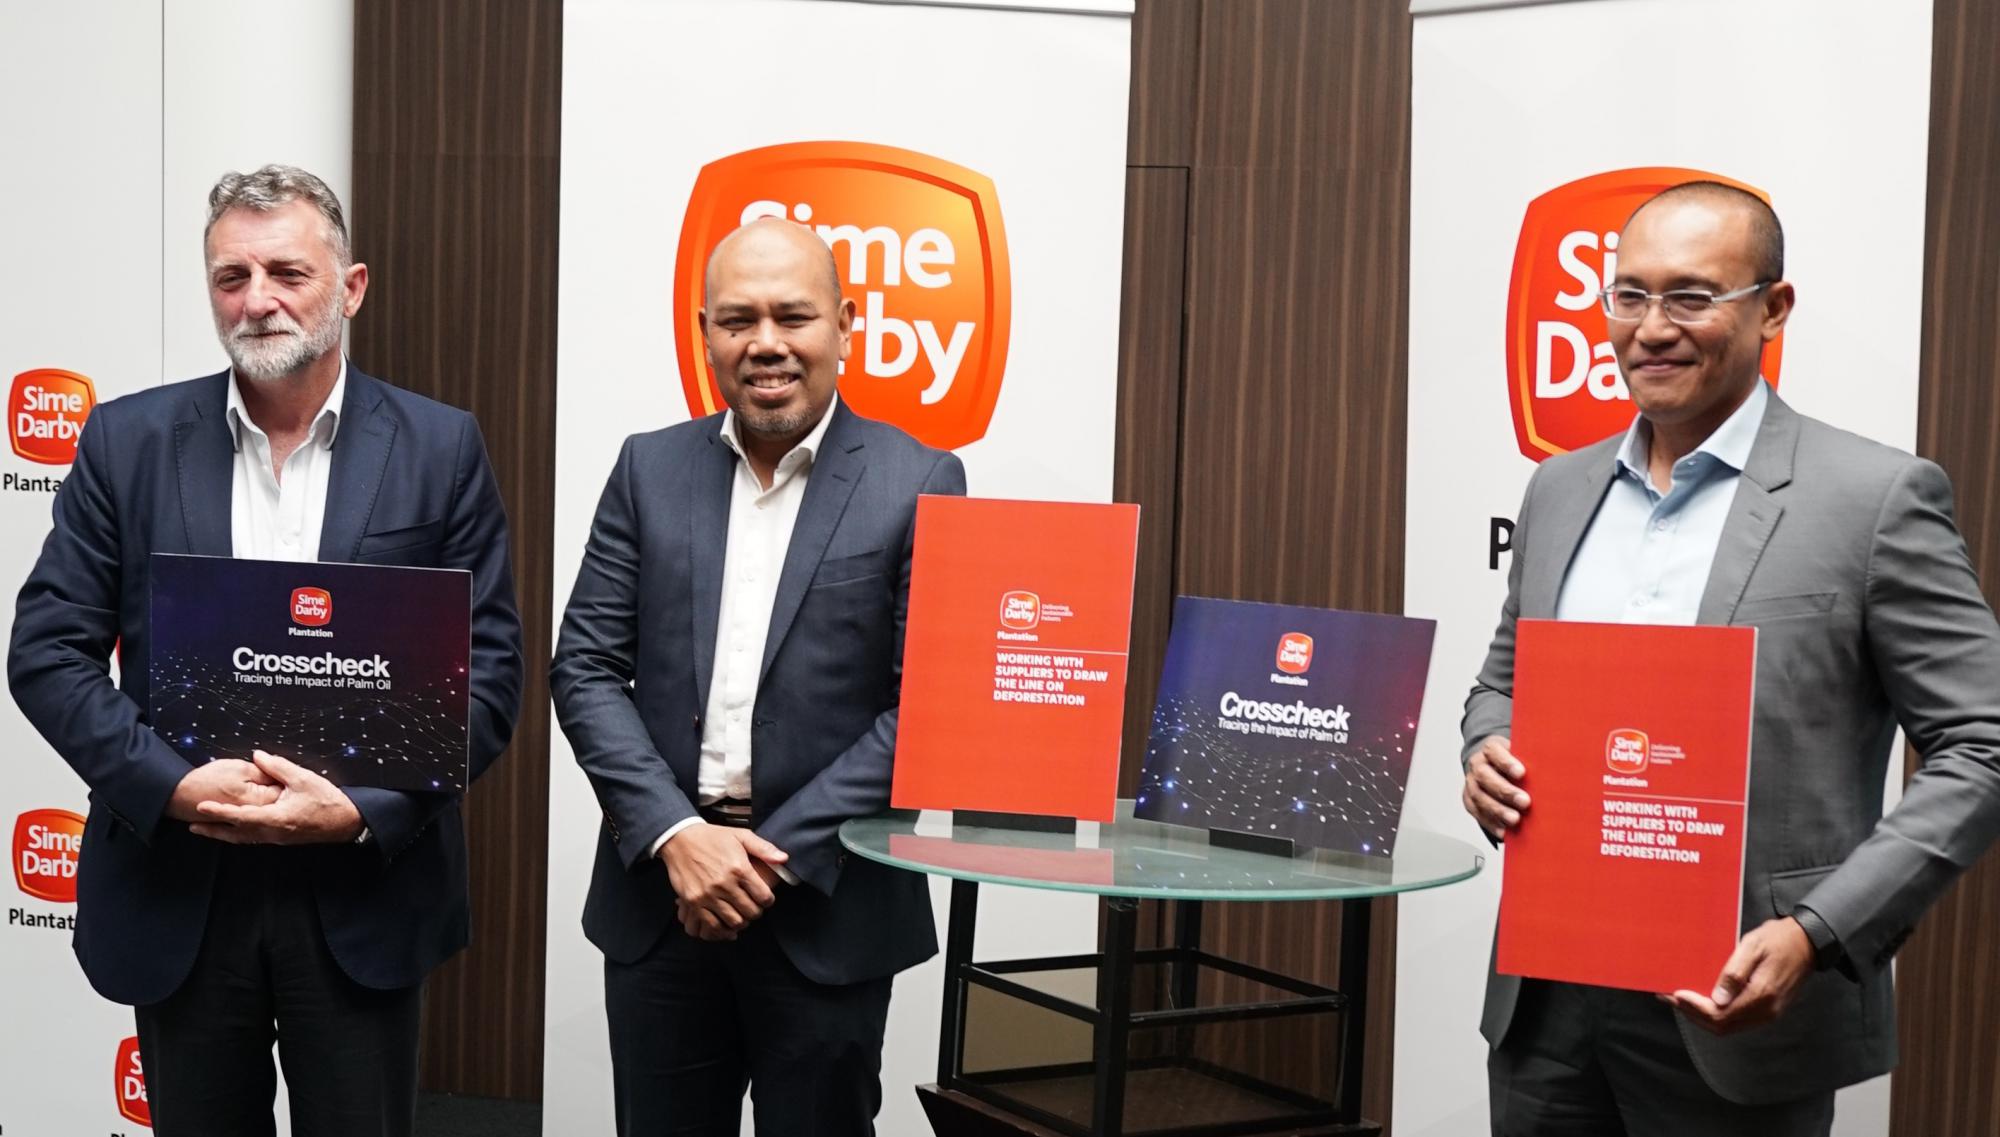 Sime Darby Plantation Registers Net Earnings of RM101 million for the Six Months Ended 30 June 2019